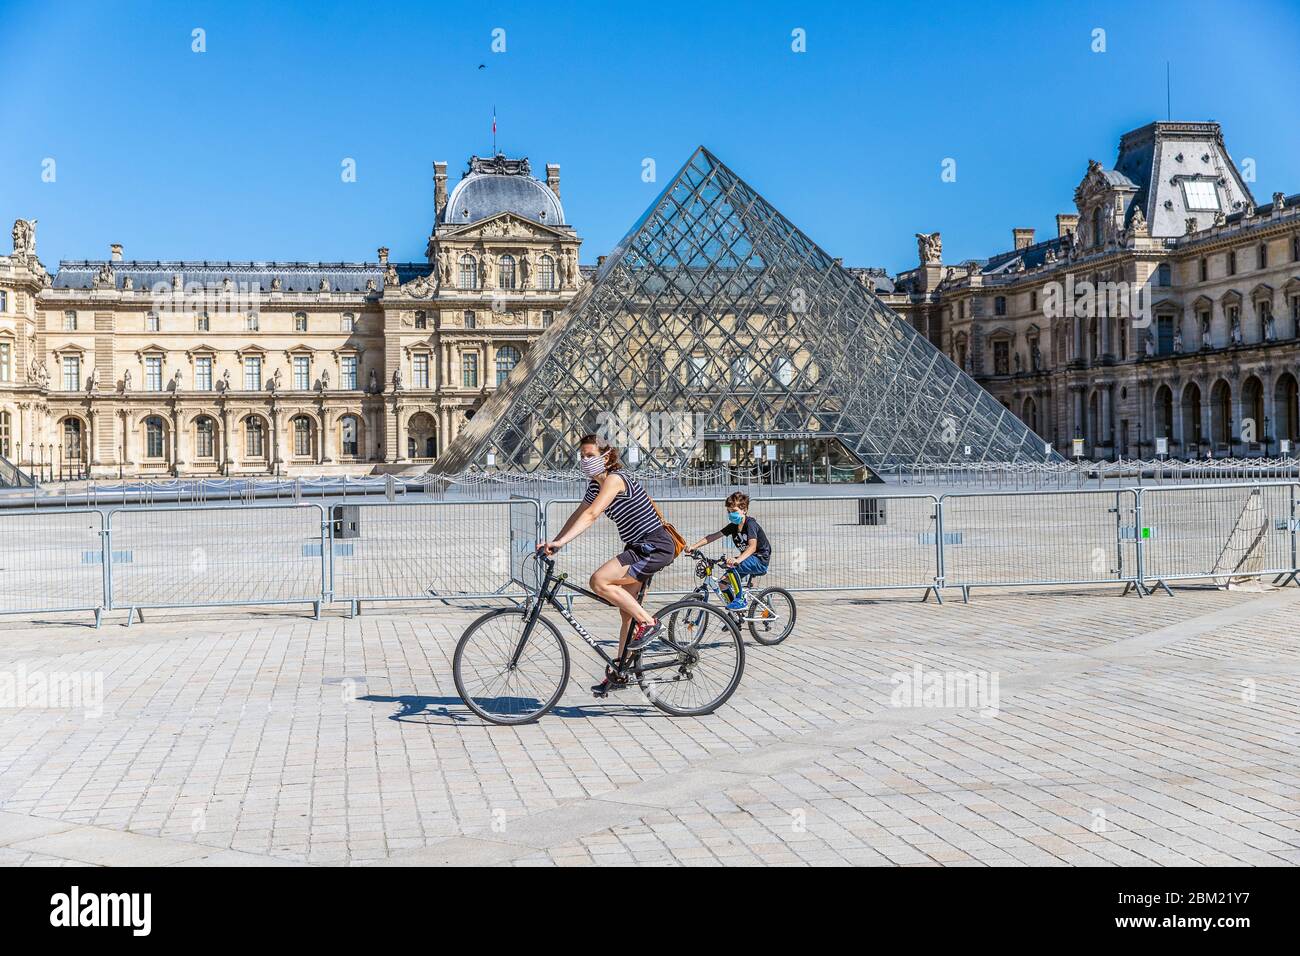 A mum and her kid biking in front of the Louvre Pyramide in Paris during the lock down Coronavirus covid-19 Stock Photo